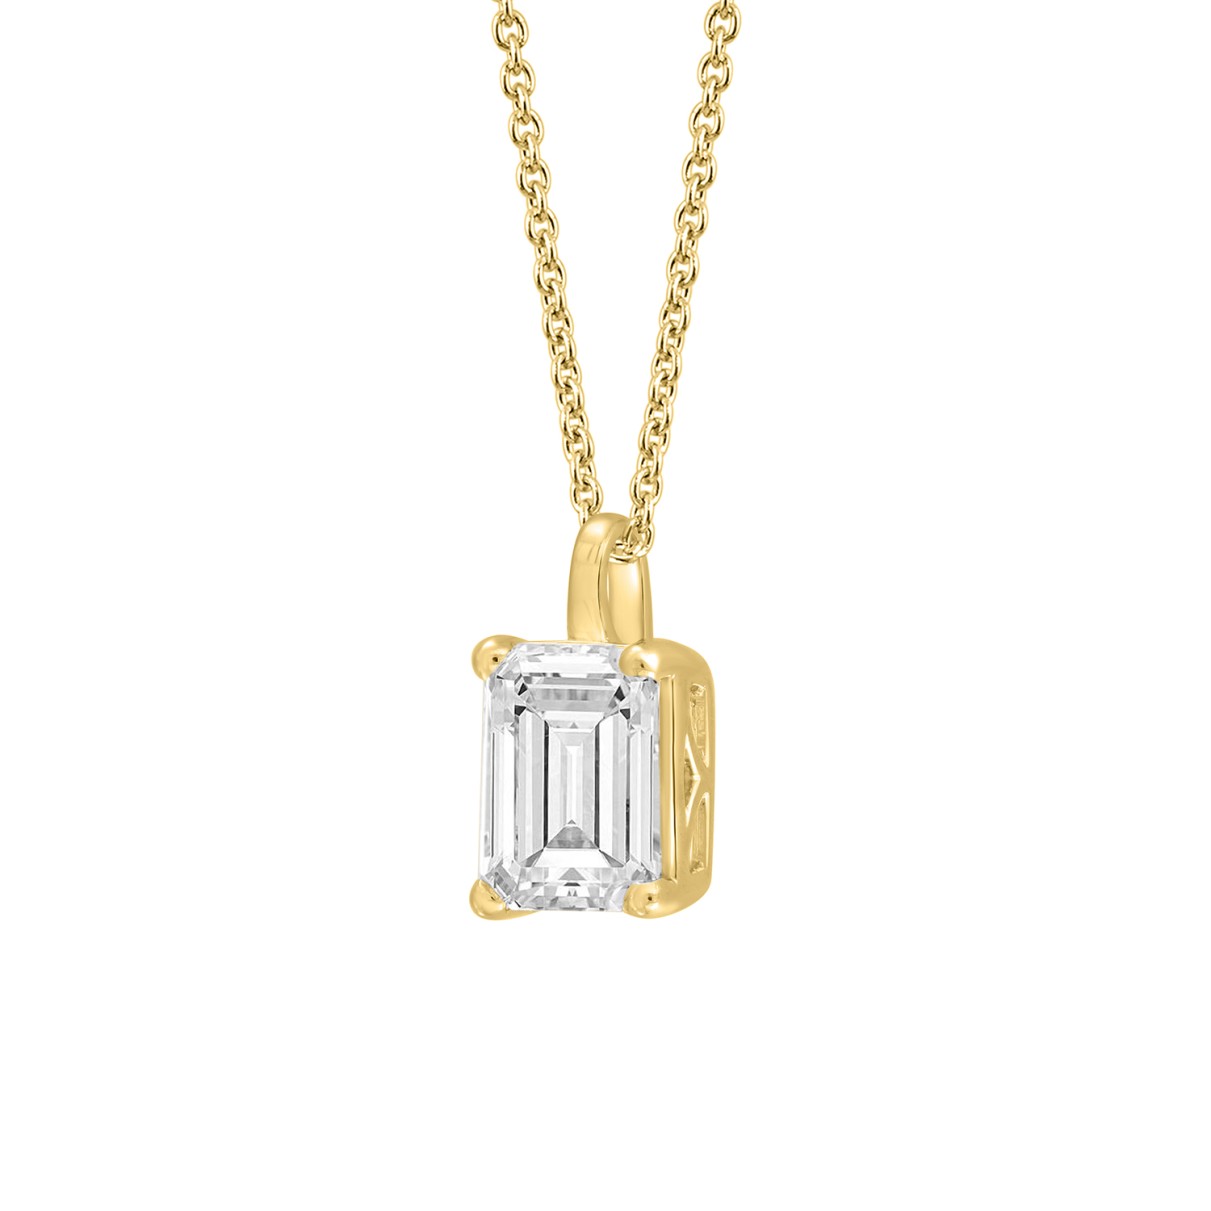 LADIES SOLITAIRE PENDANT WITH CHAIN 1 1/2CT EMERALD DIAMOND 14K YELLOW GOLD